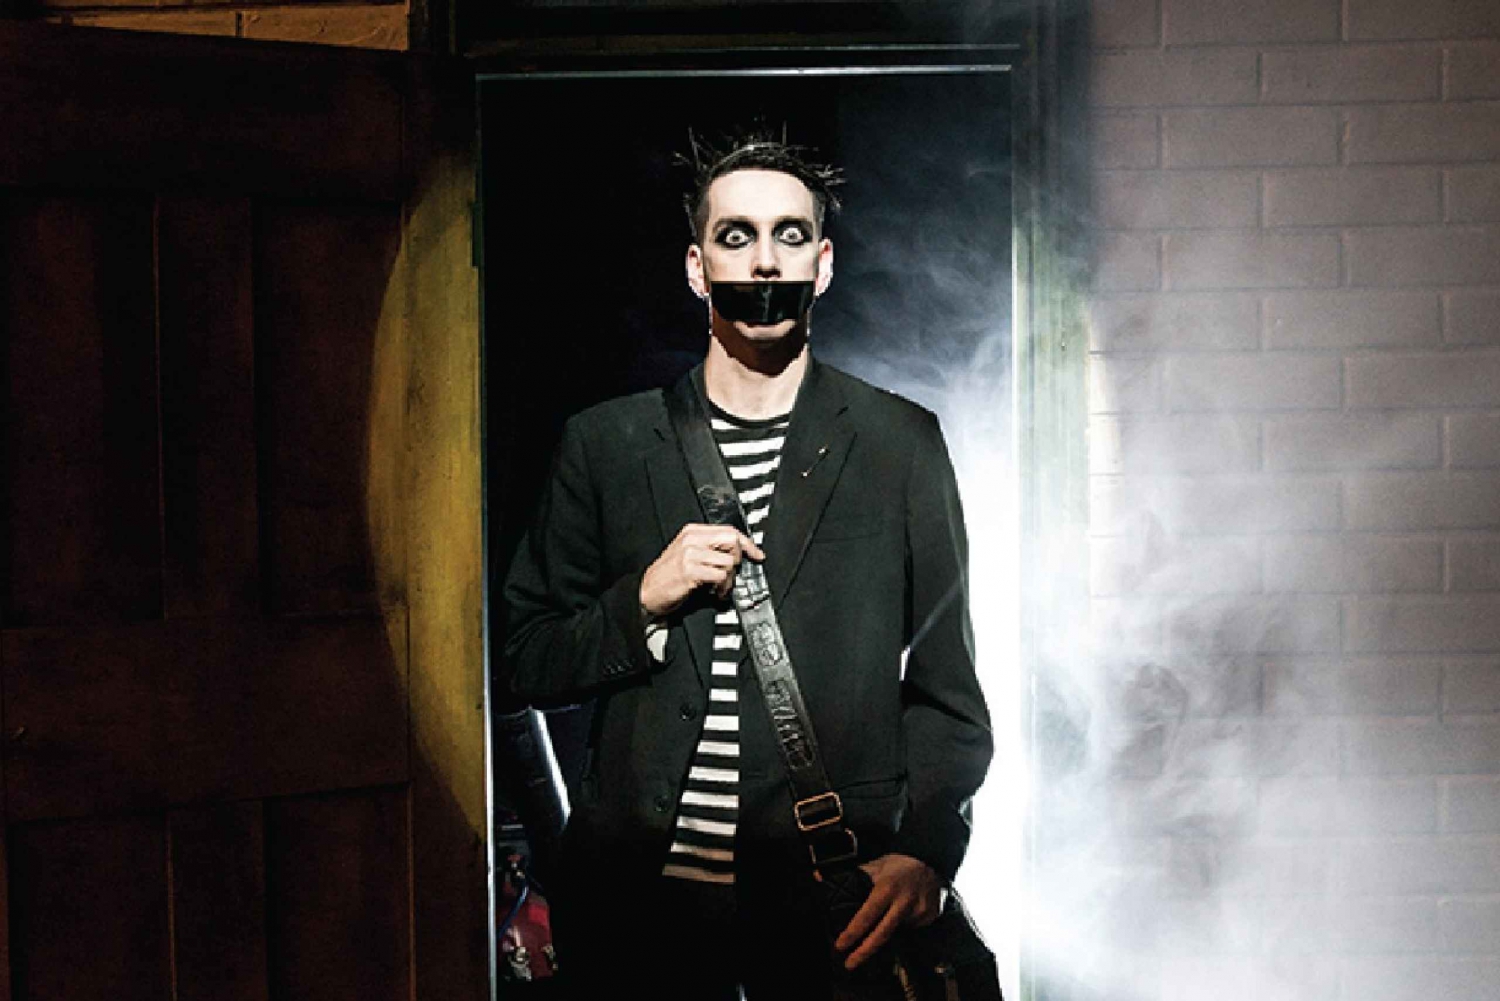 Las Vegas: Tape Face Show at the MGM Grand